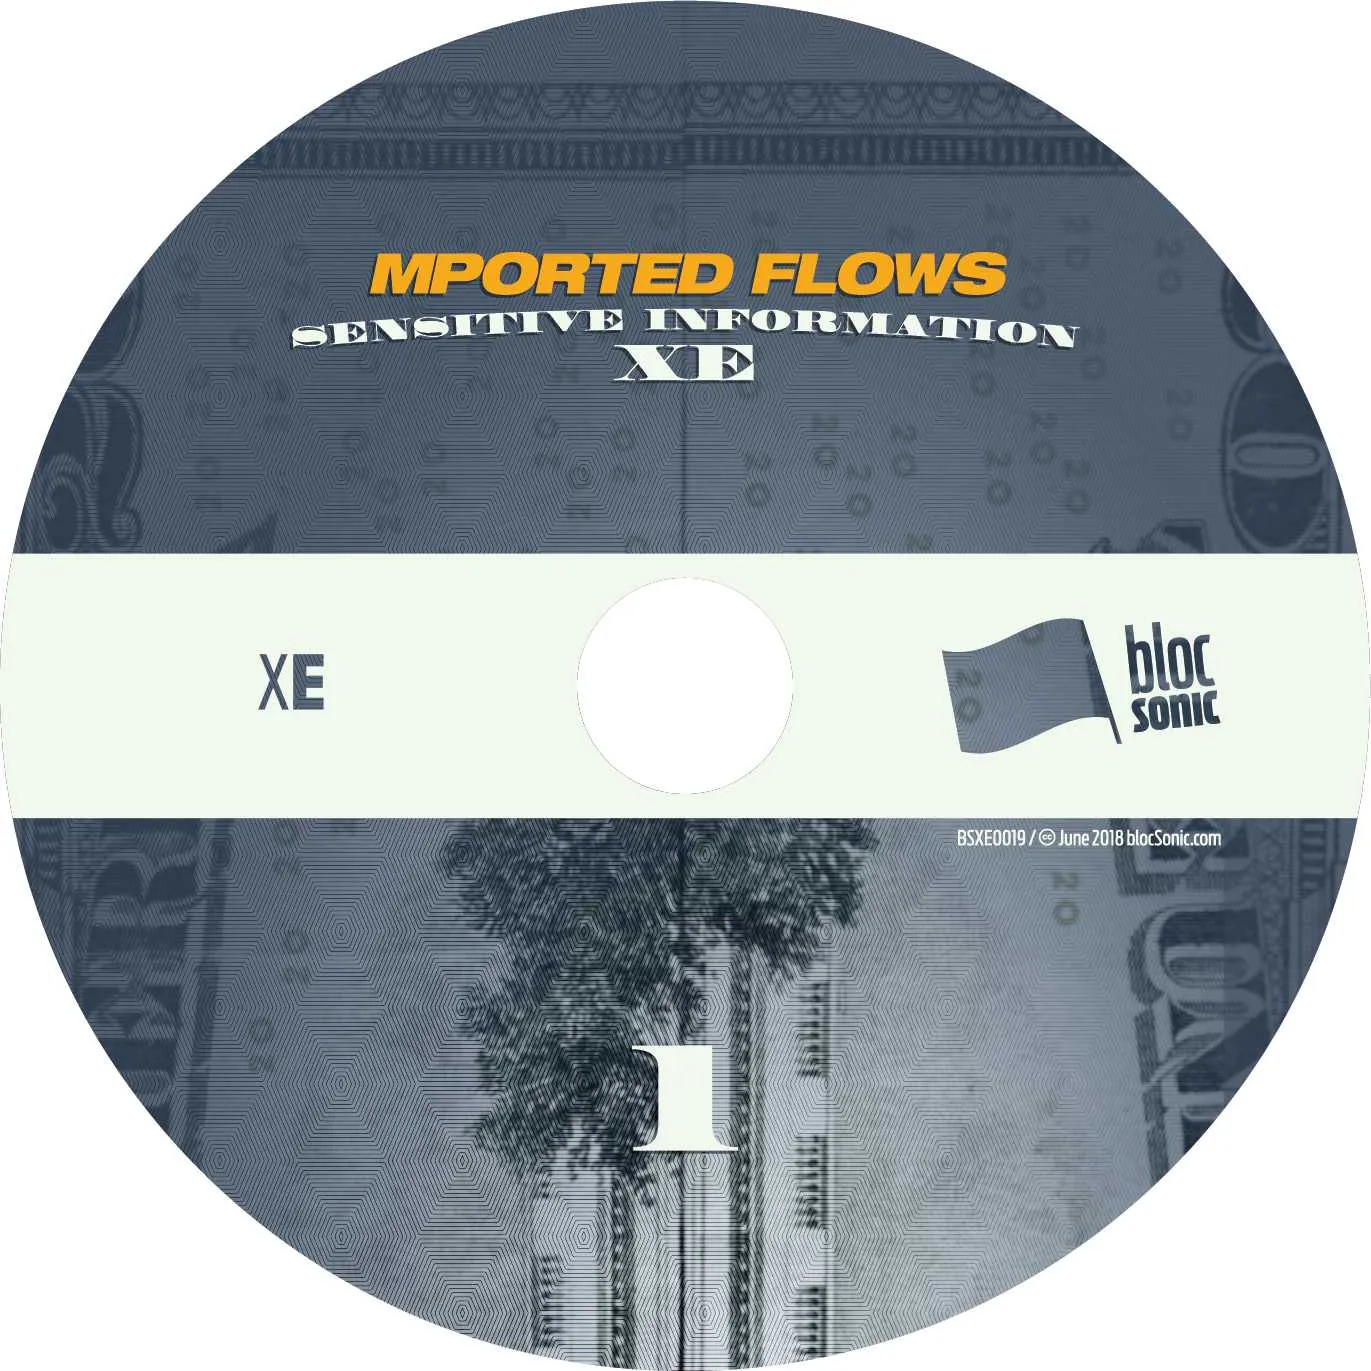 Album disc for “Sensitive Information XE” by Mported Flows